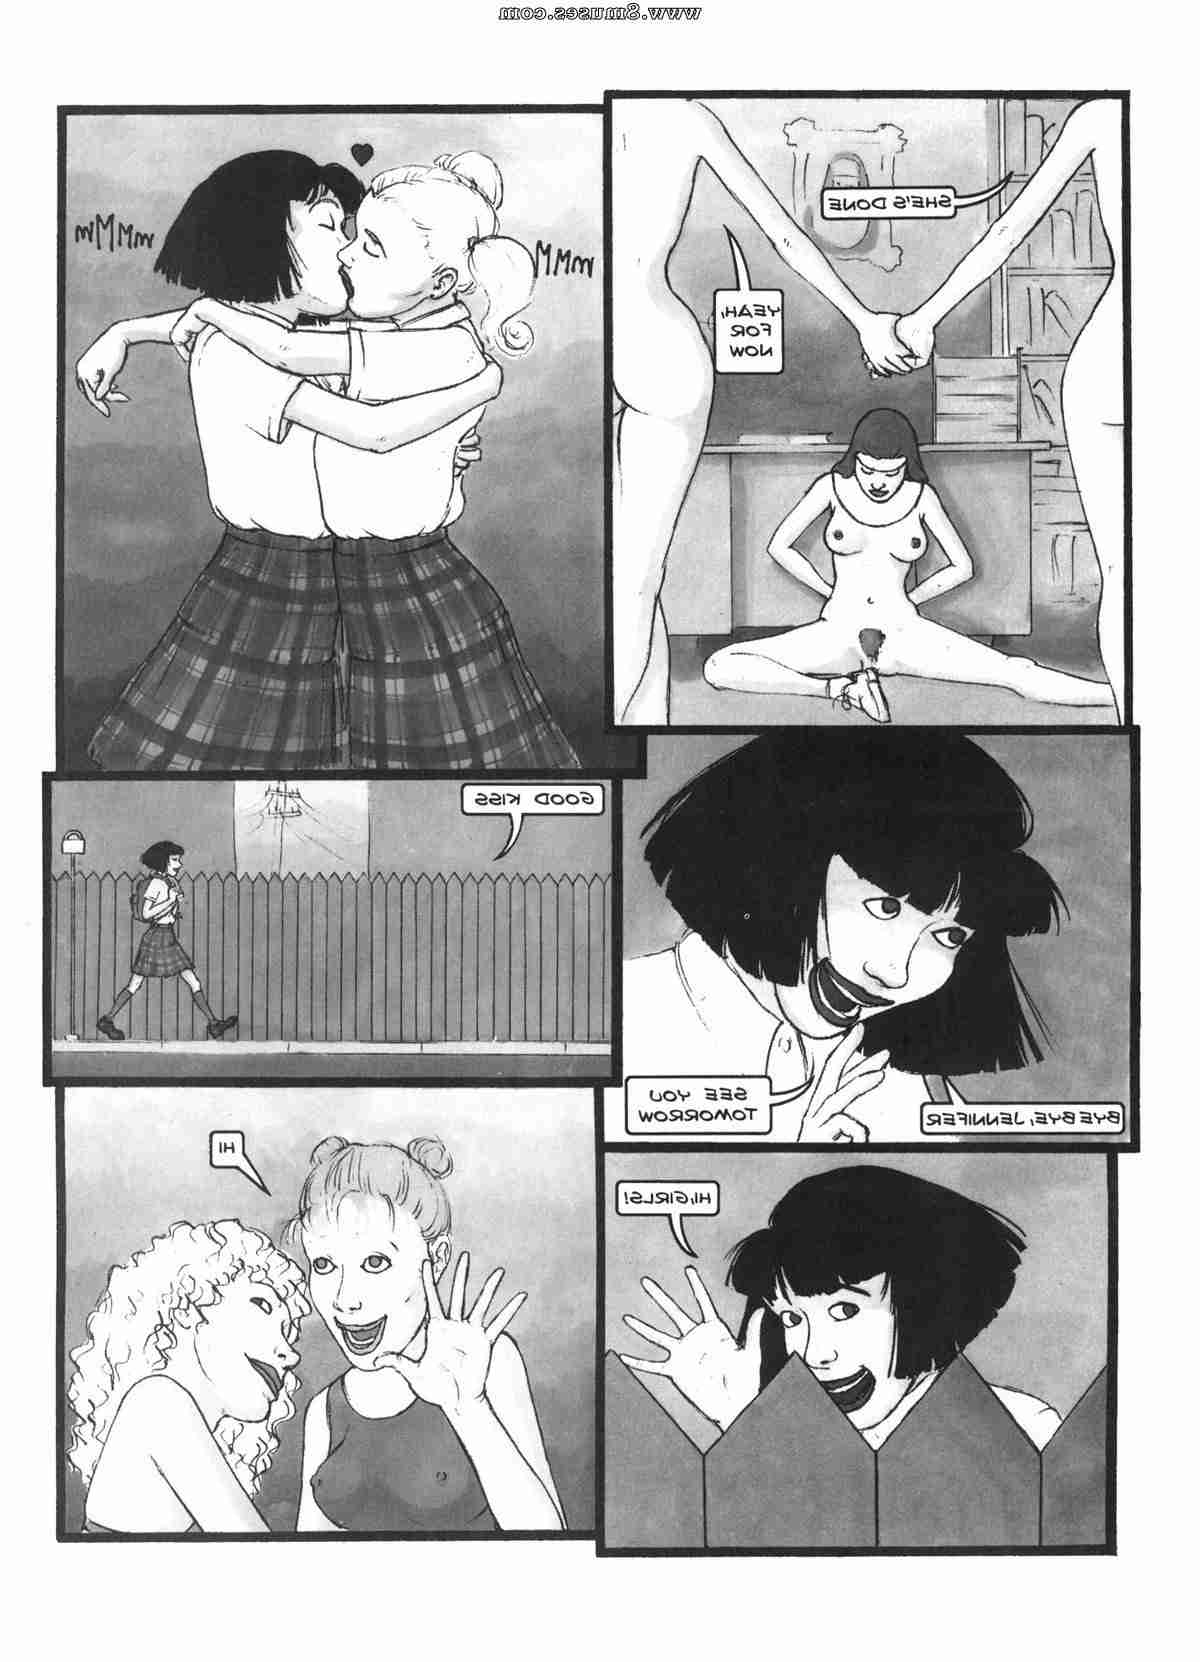 Black And White Lesbian Porn Cartoons - The Adventures of a Lesbian College School Girl | Sex Comics